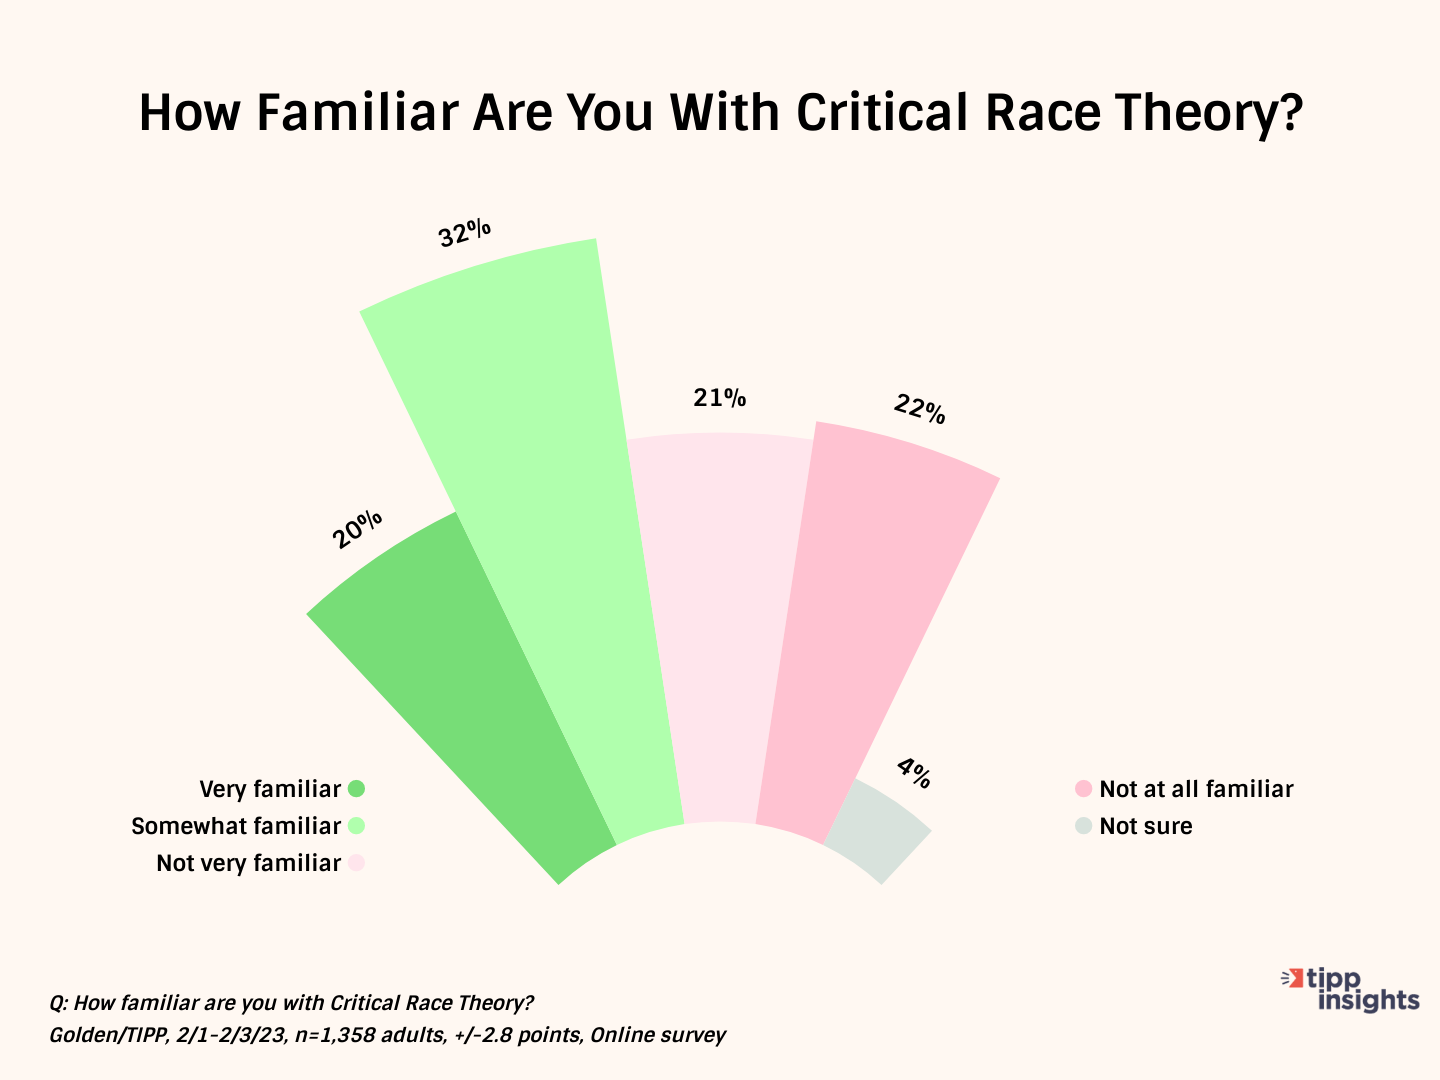 Critical Race Theory In Schools – Another Divisive Topic: Golden/TIPP Poll